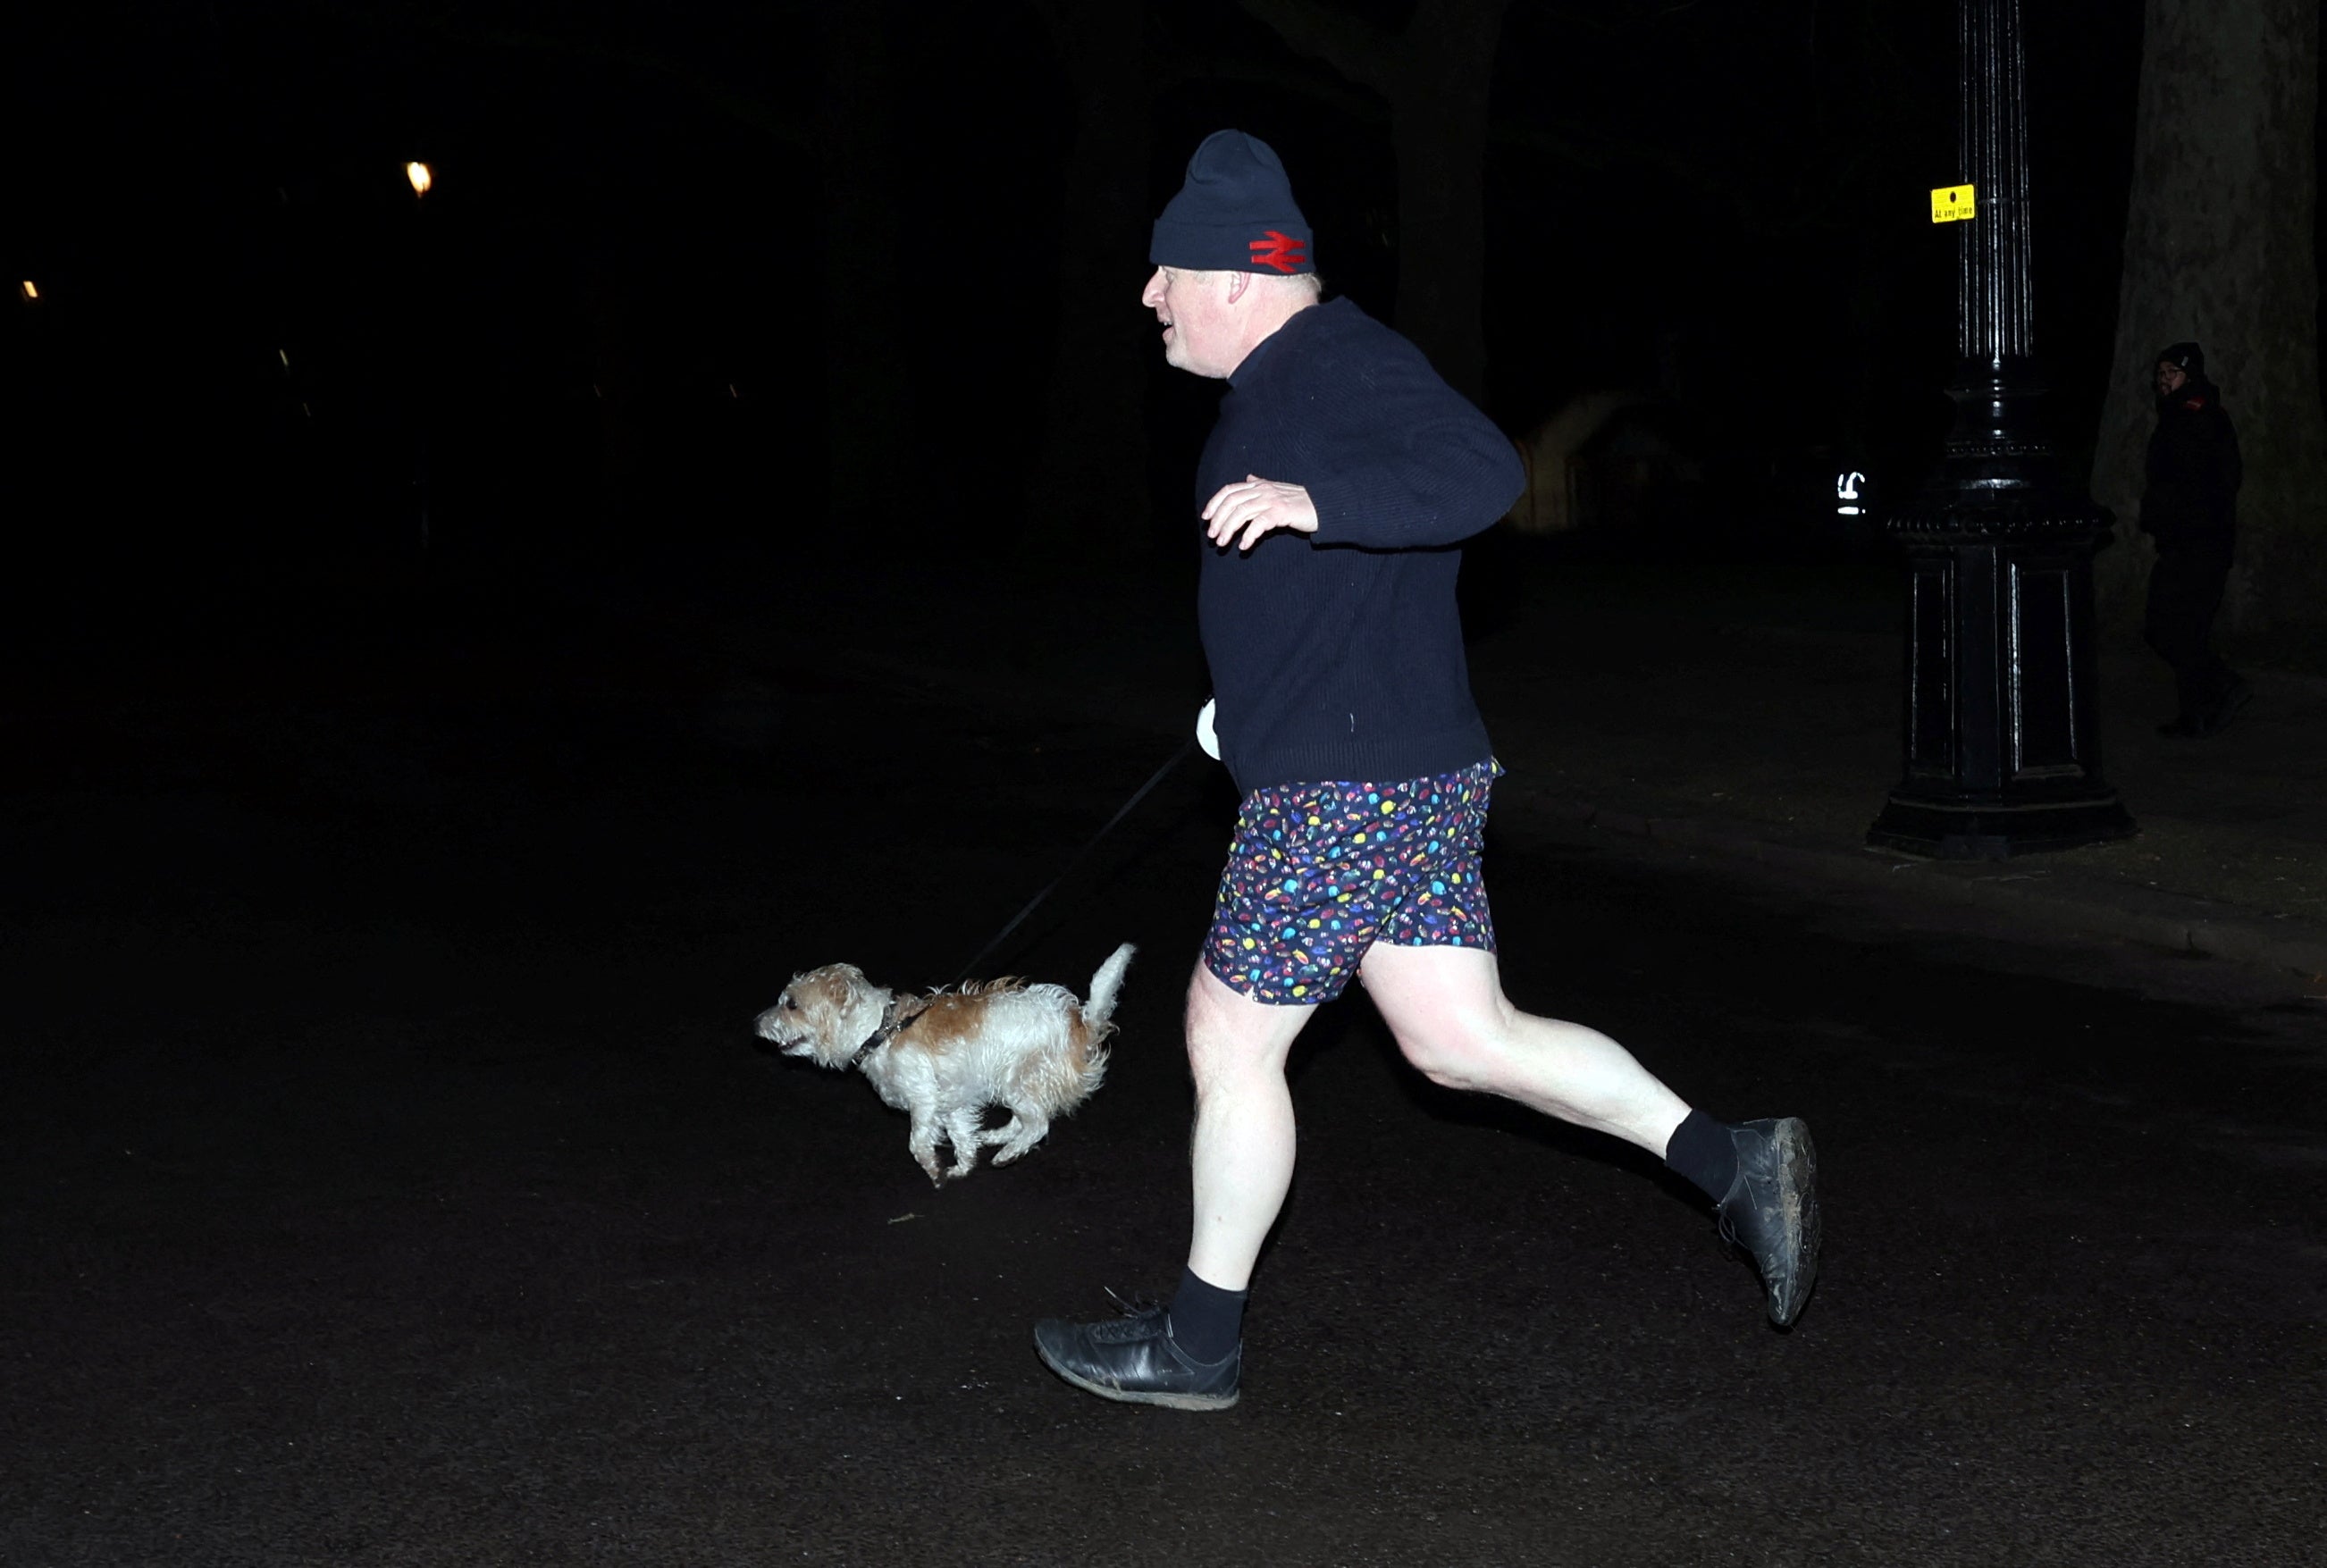 Anything but conservative: Boris Johnson out jogging in eclectic attire